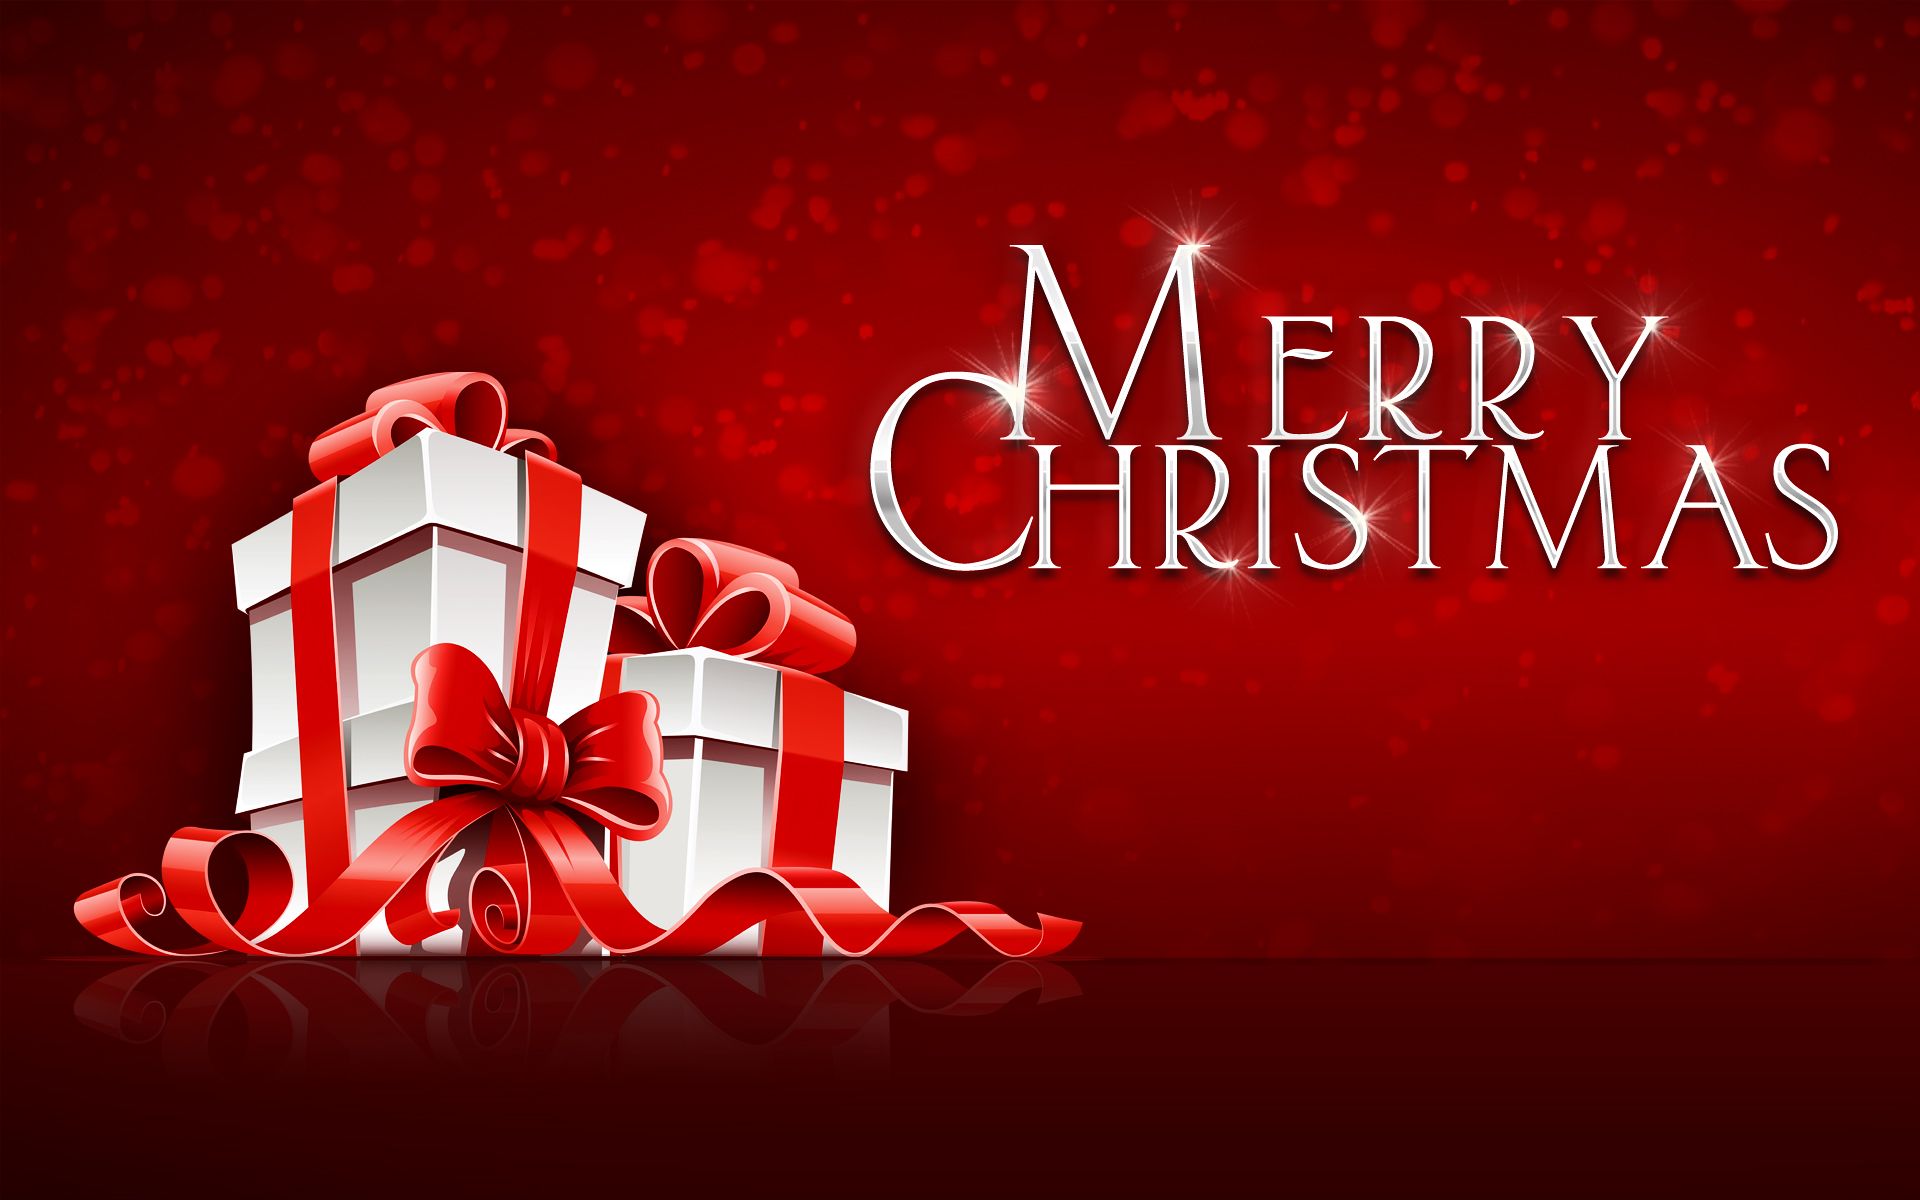 Merry Christmas Wallpaper HD Free Download